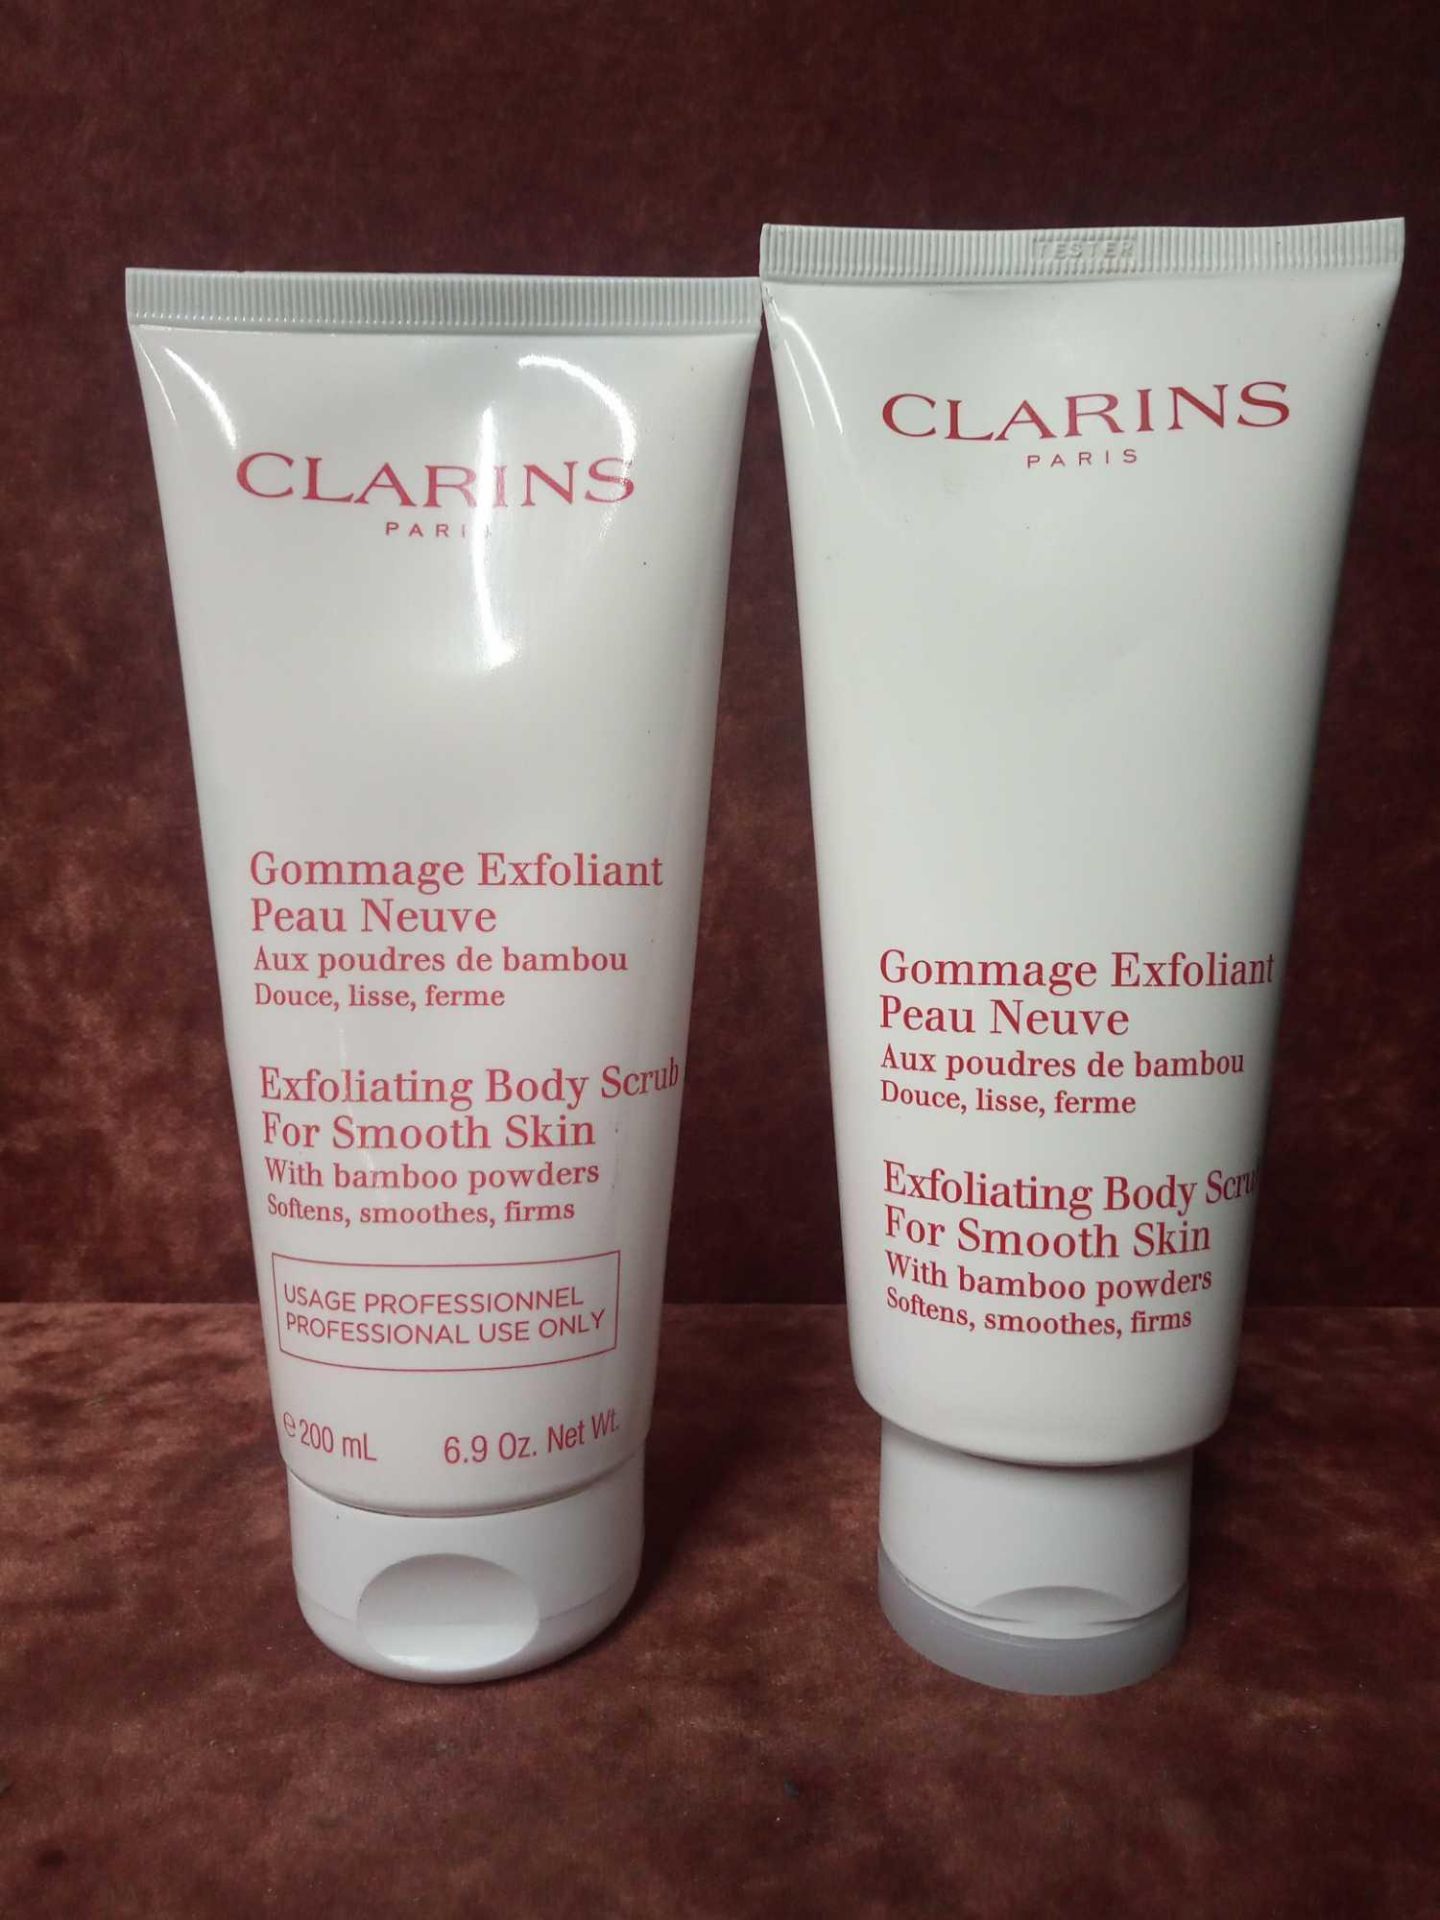 RRP £300 Gift Bag To Contain 2 Testers Of Clarins Exfoliating Body Scrub For Smooth Skin 200 Ml Each